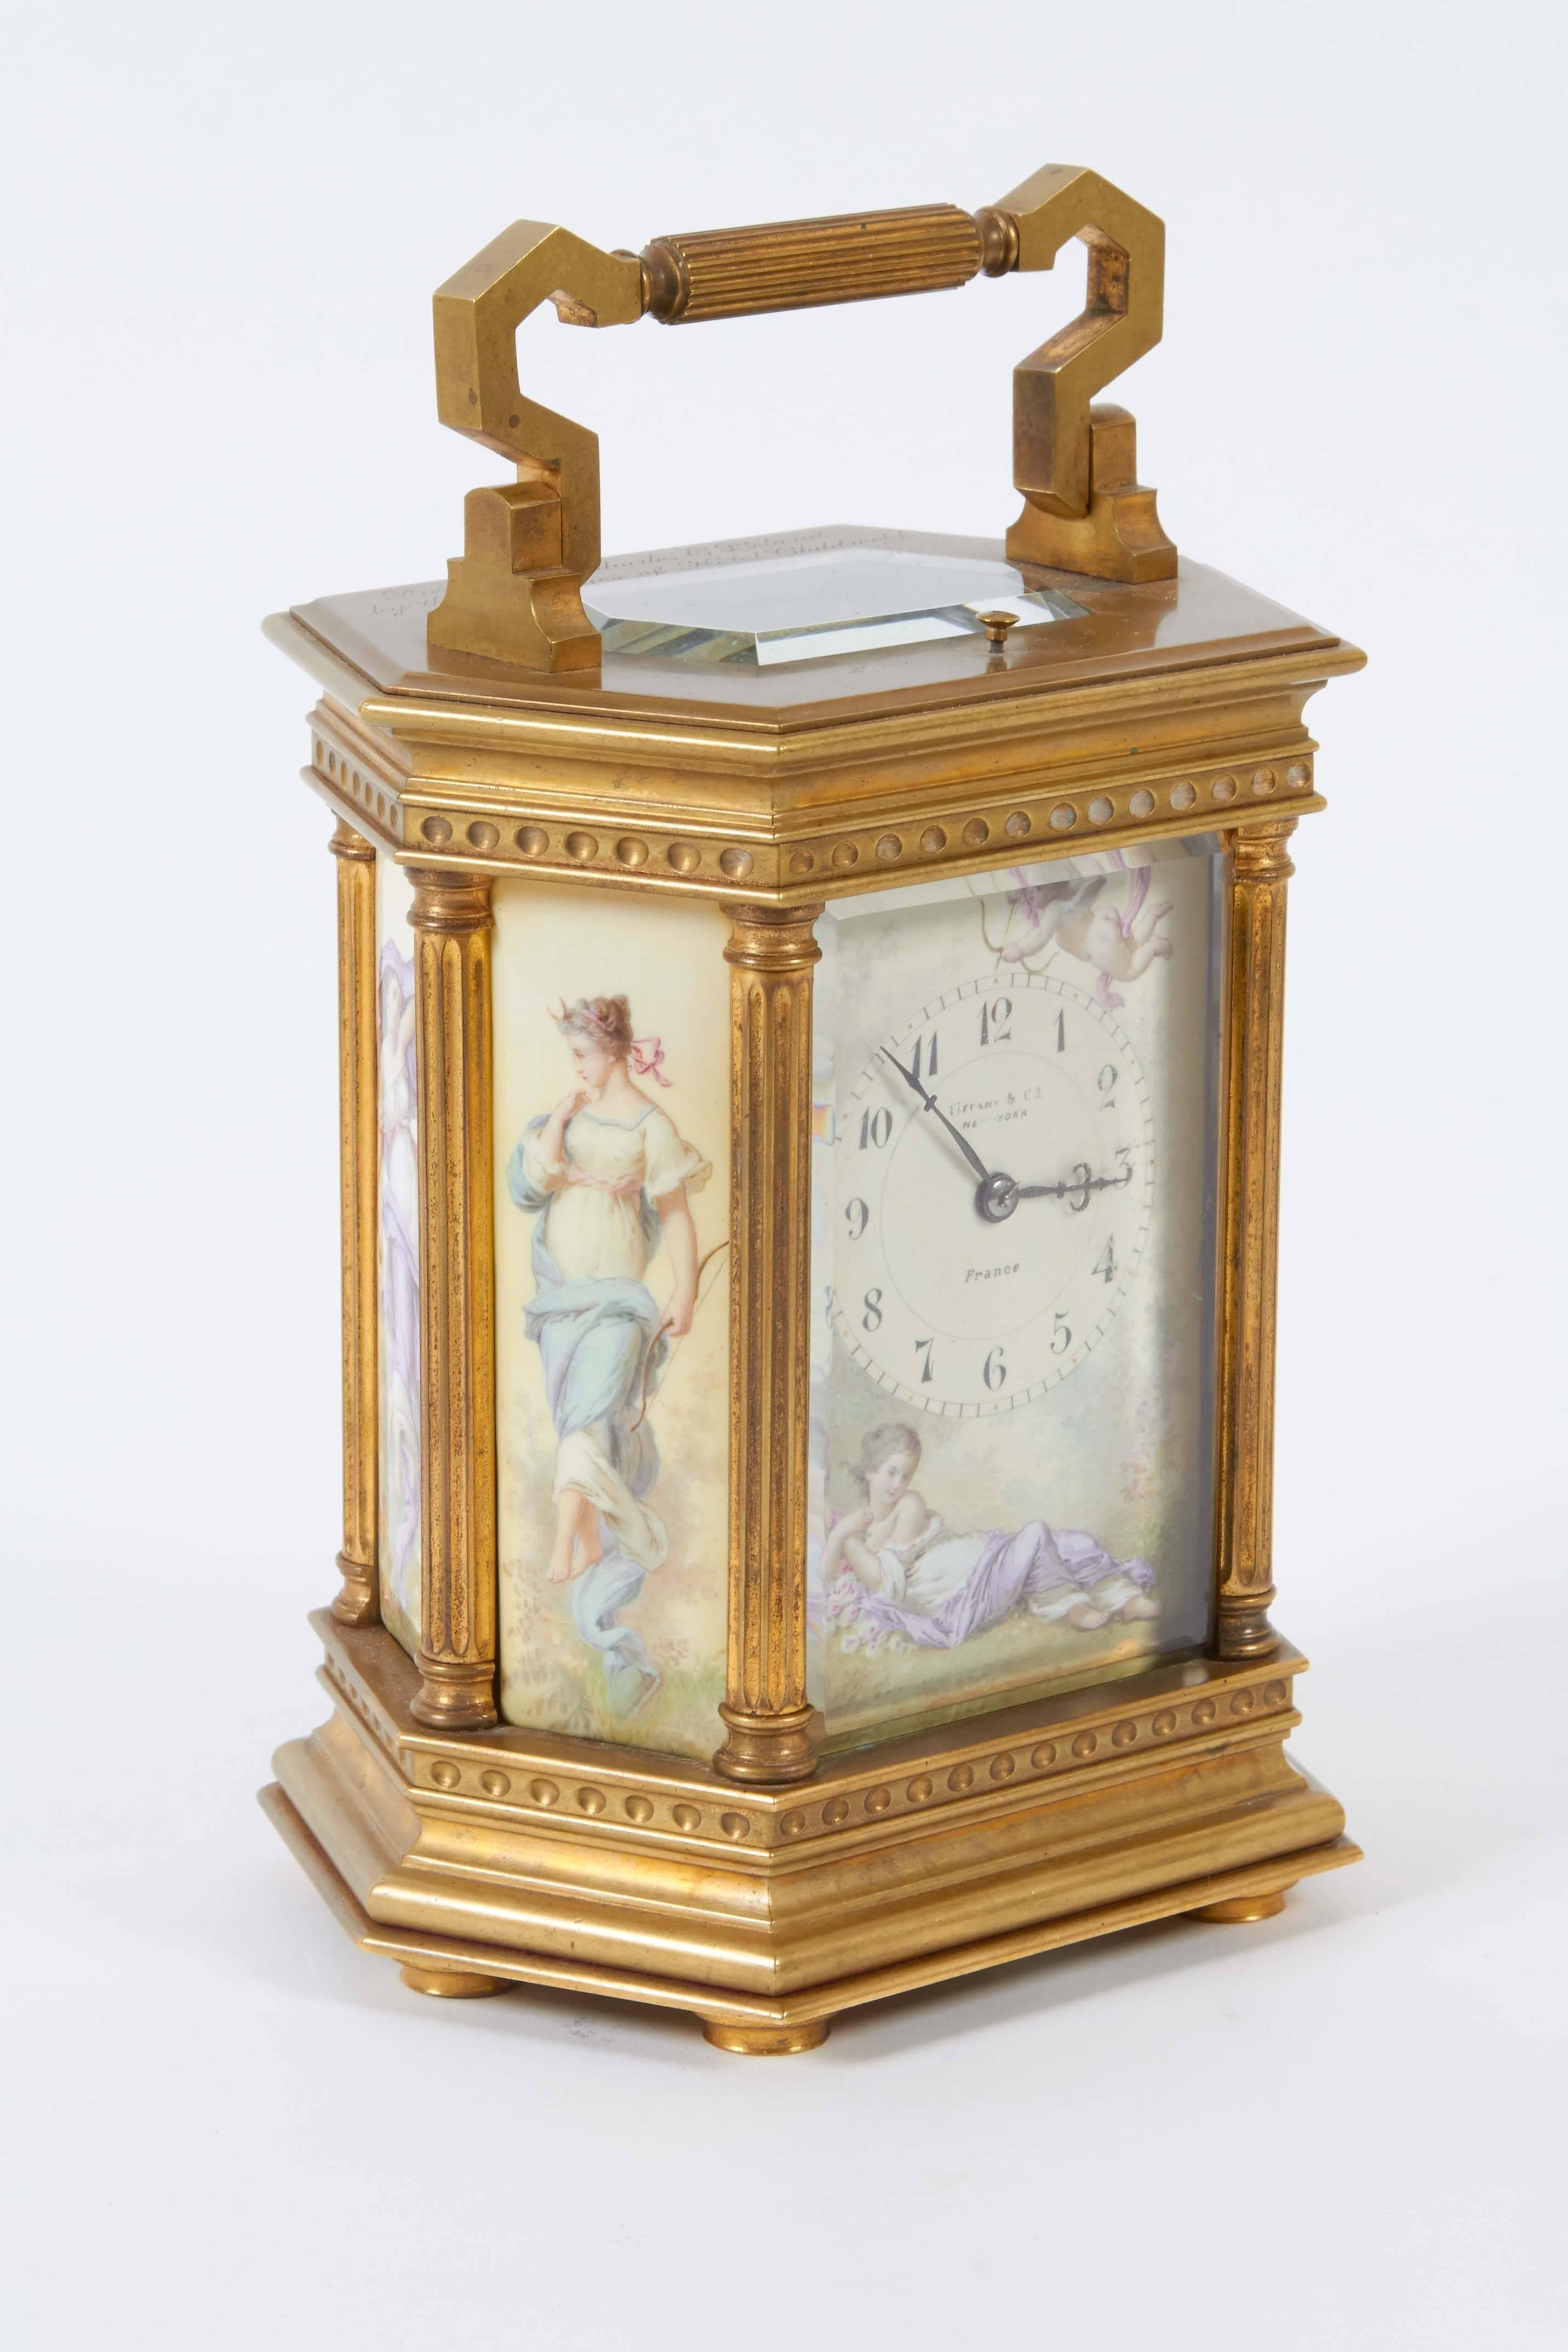 A French early 20th century carriage clock by Tiffany & Co., of hexagonal form in gilt bronze, with neoclassical architectural elements, framed by fluted columns and decorative panels, depicting classical maidens on four sides, one figure